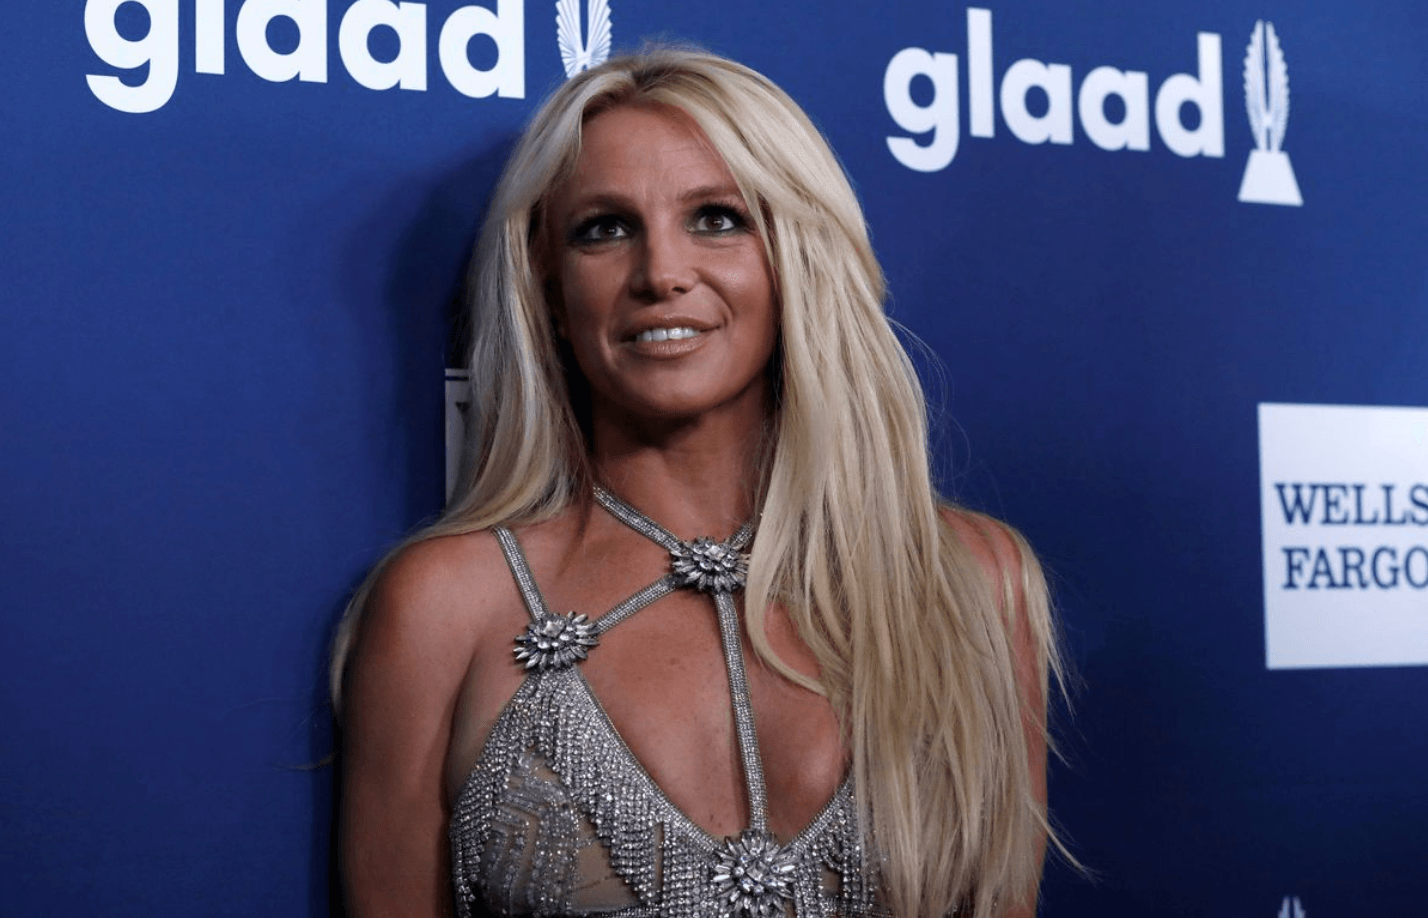 Britney Spears’ lawyer seeks to oust singer’s father from conservatorship